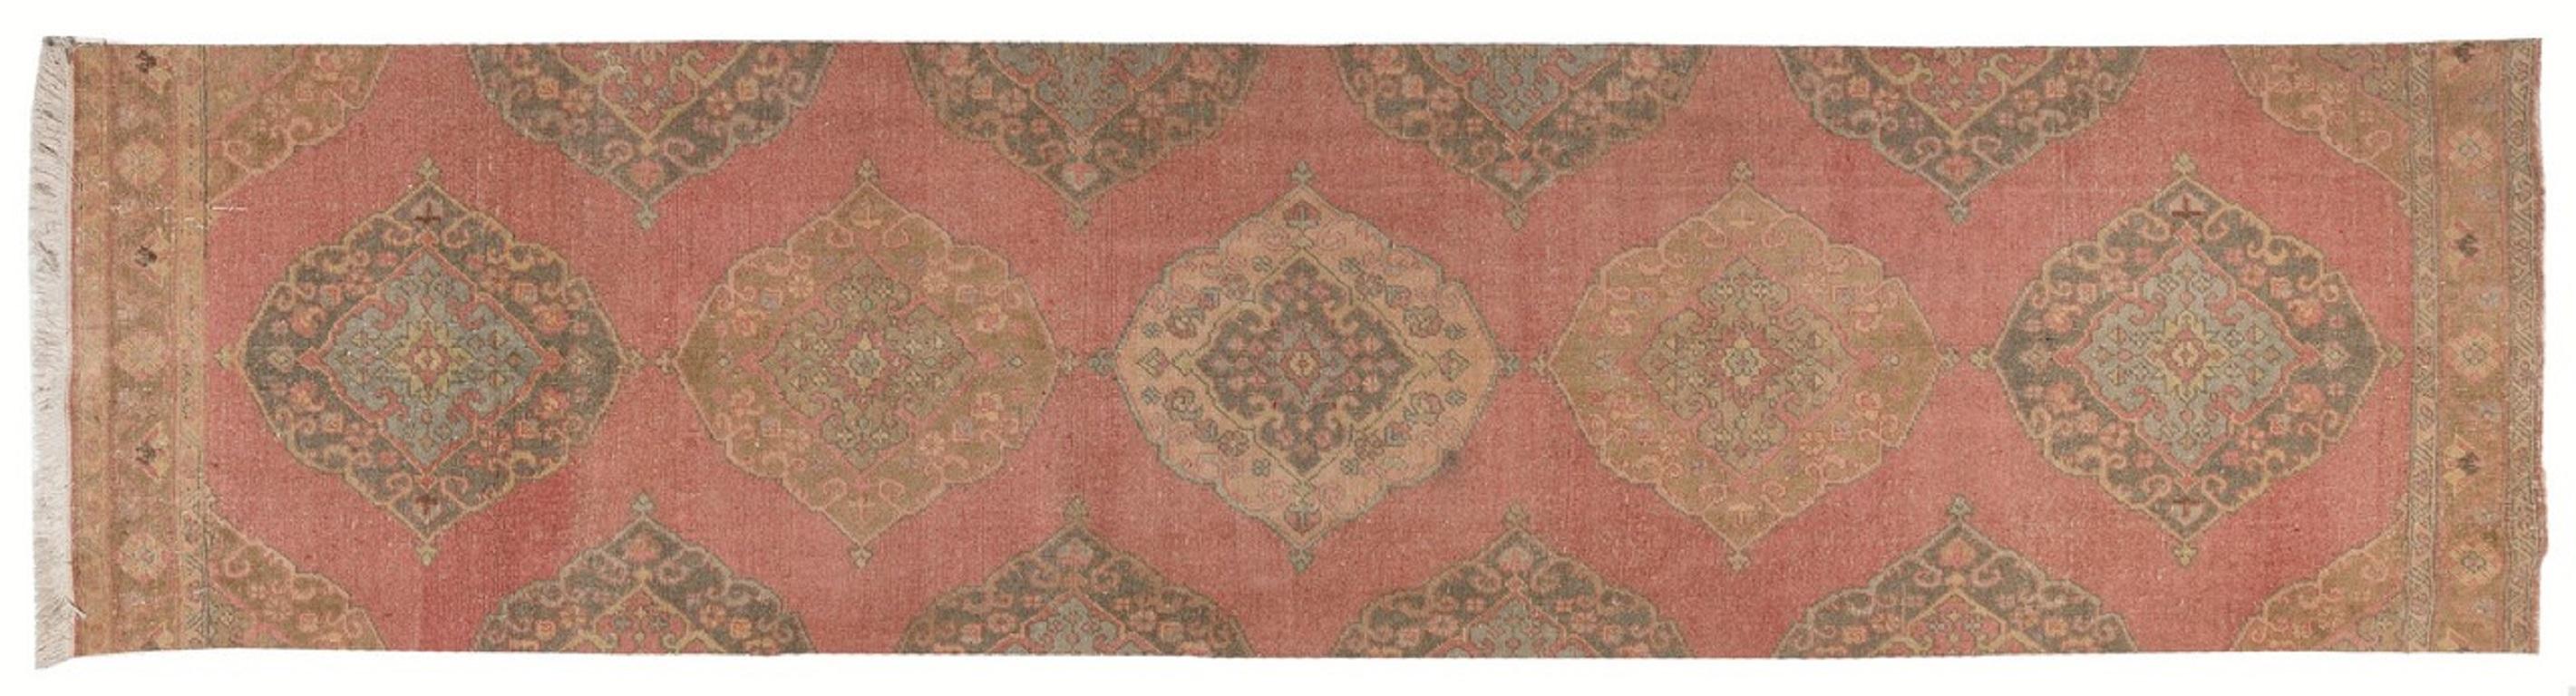 Turkish 3.2x12.6 Ft Vintage Oushak Runner Rug for Traditional, Rustic, Cottage style  For Sale